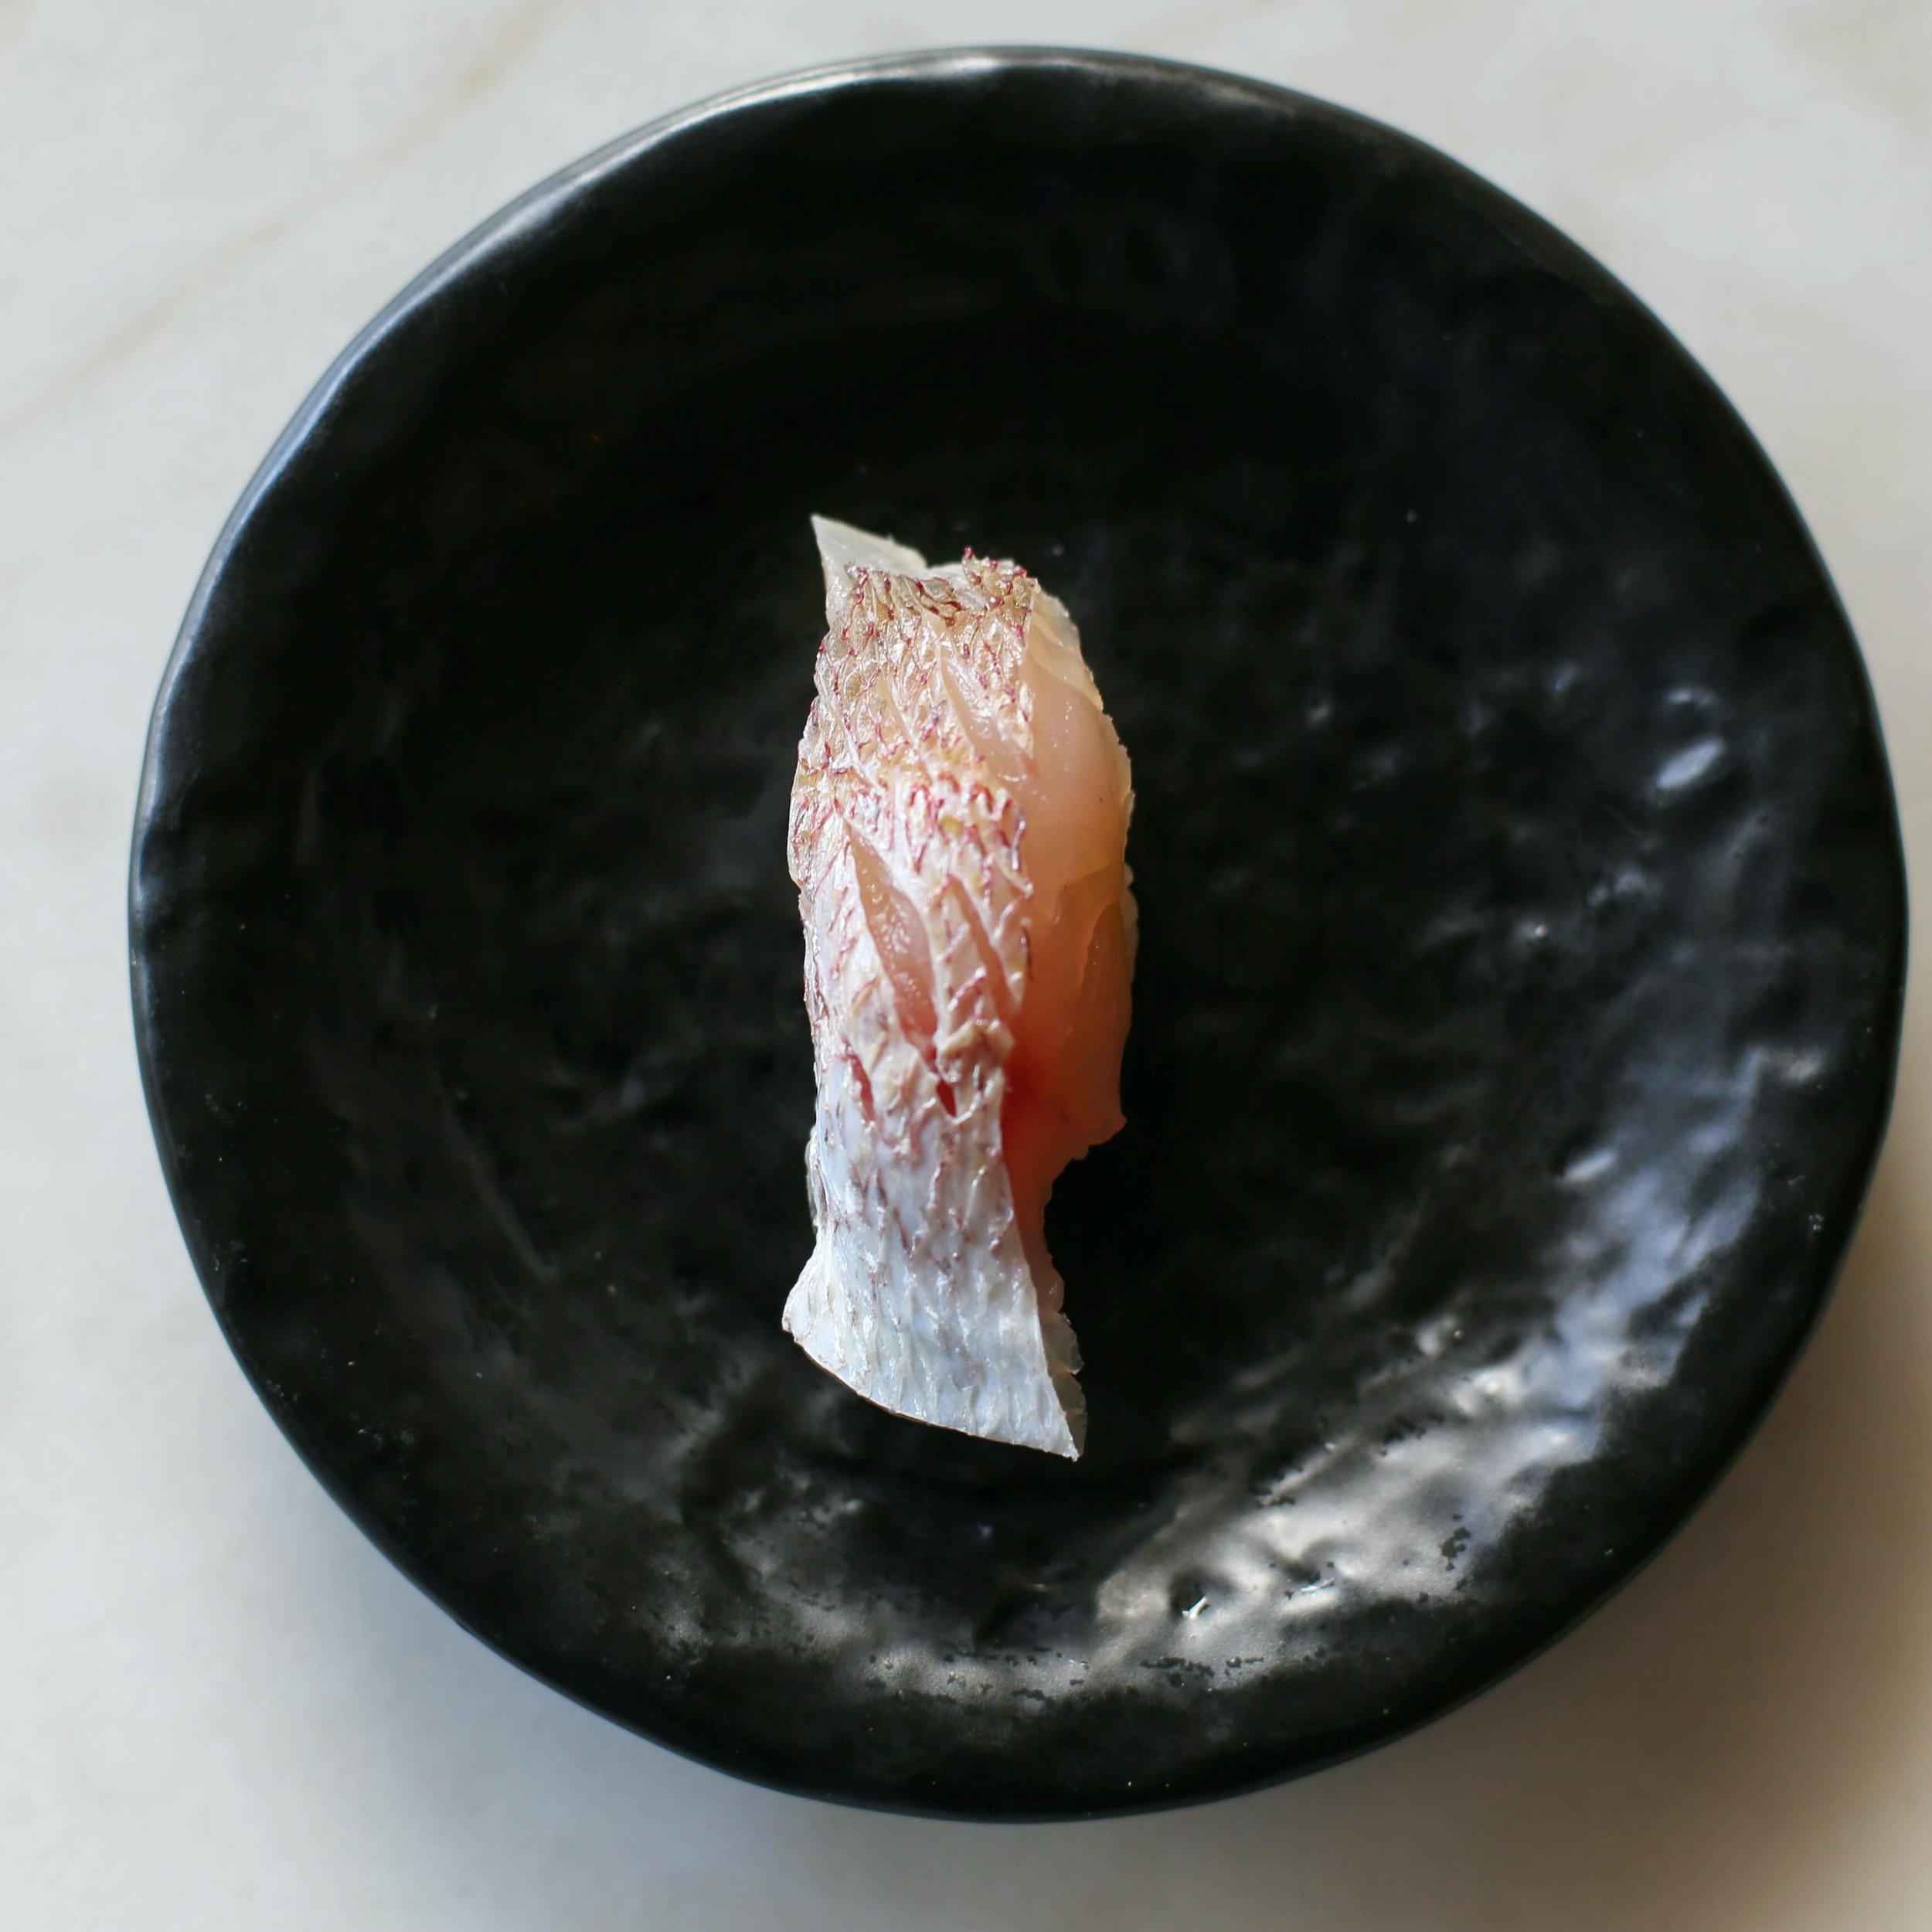 Kasugo-Dai | Baby Snapper 
When a snapper is around one year old, it is called Kasugo&mdash;&ldquo;child of spring.&rdquo; And spring is when baby snapper comes into season! Lean, complex, and slightly sweet. Get it while it lasts 🍣